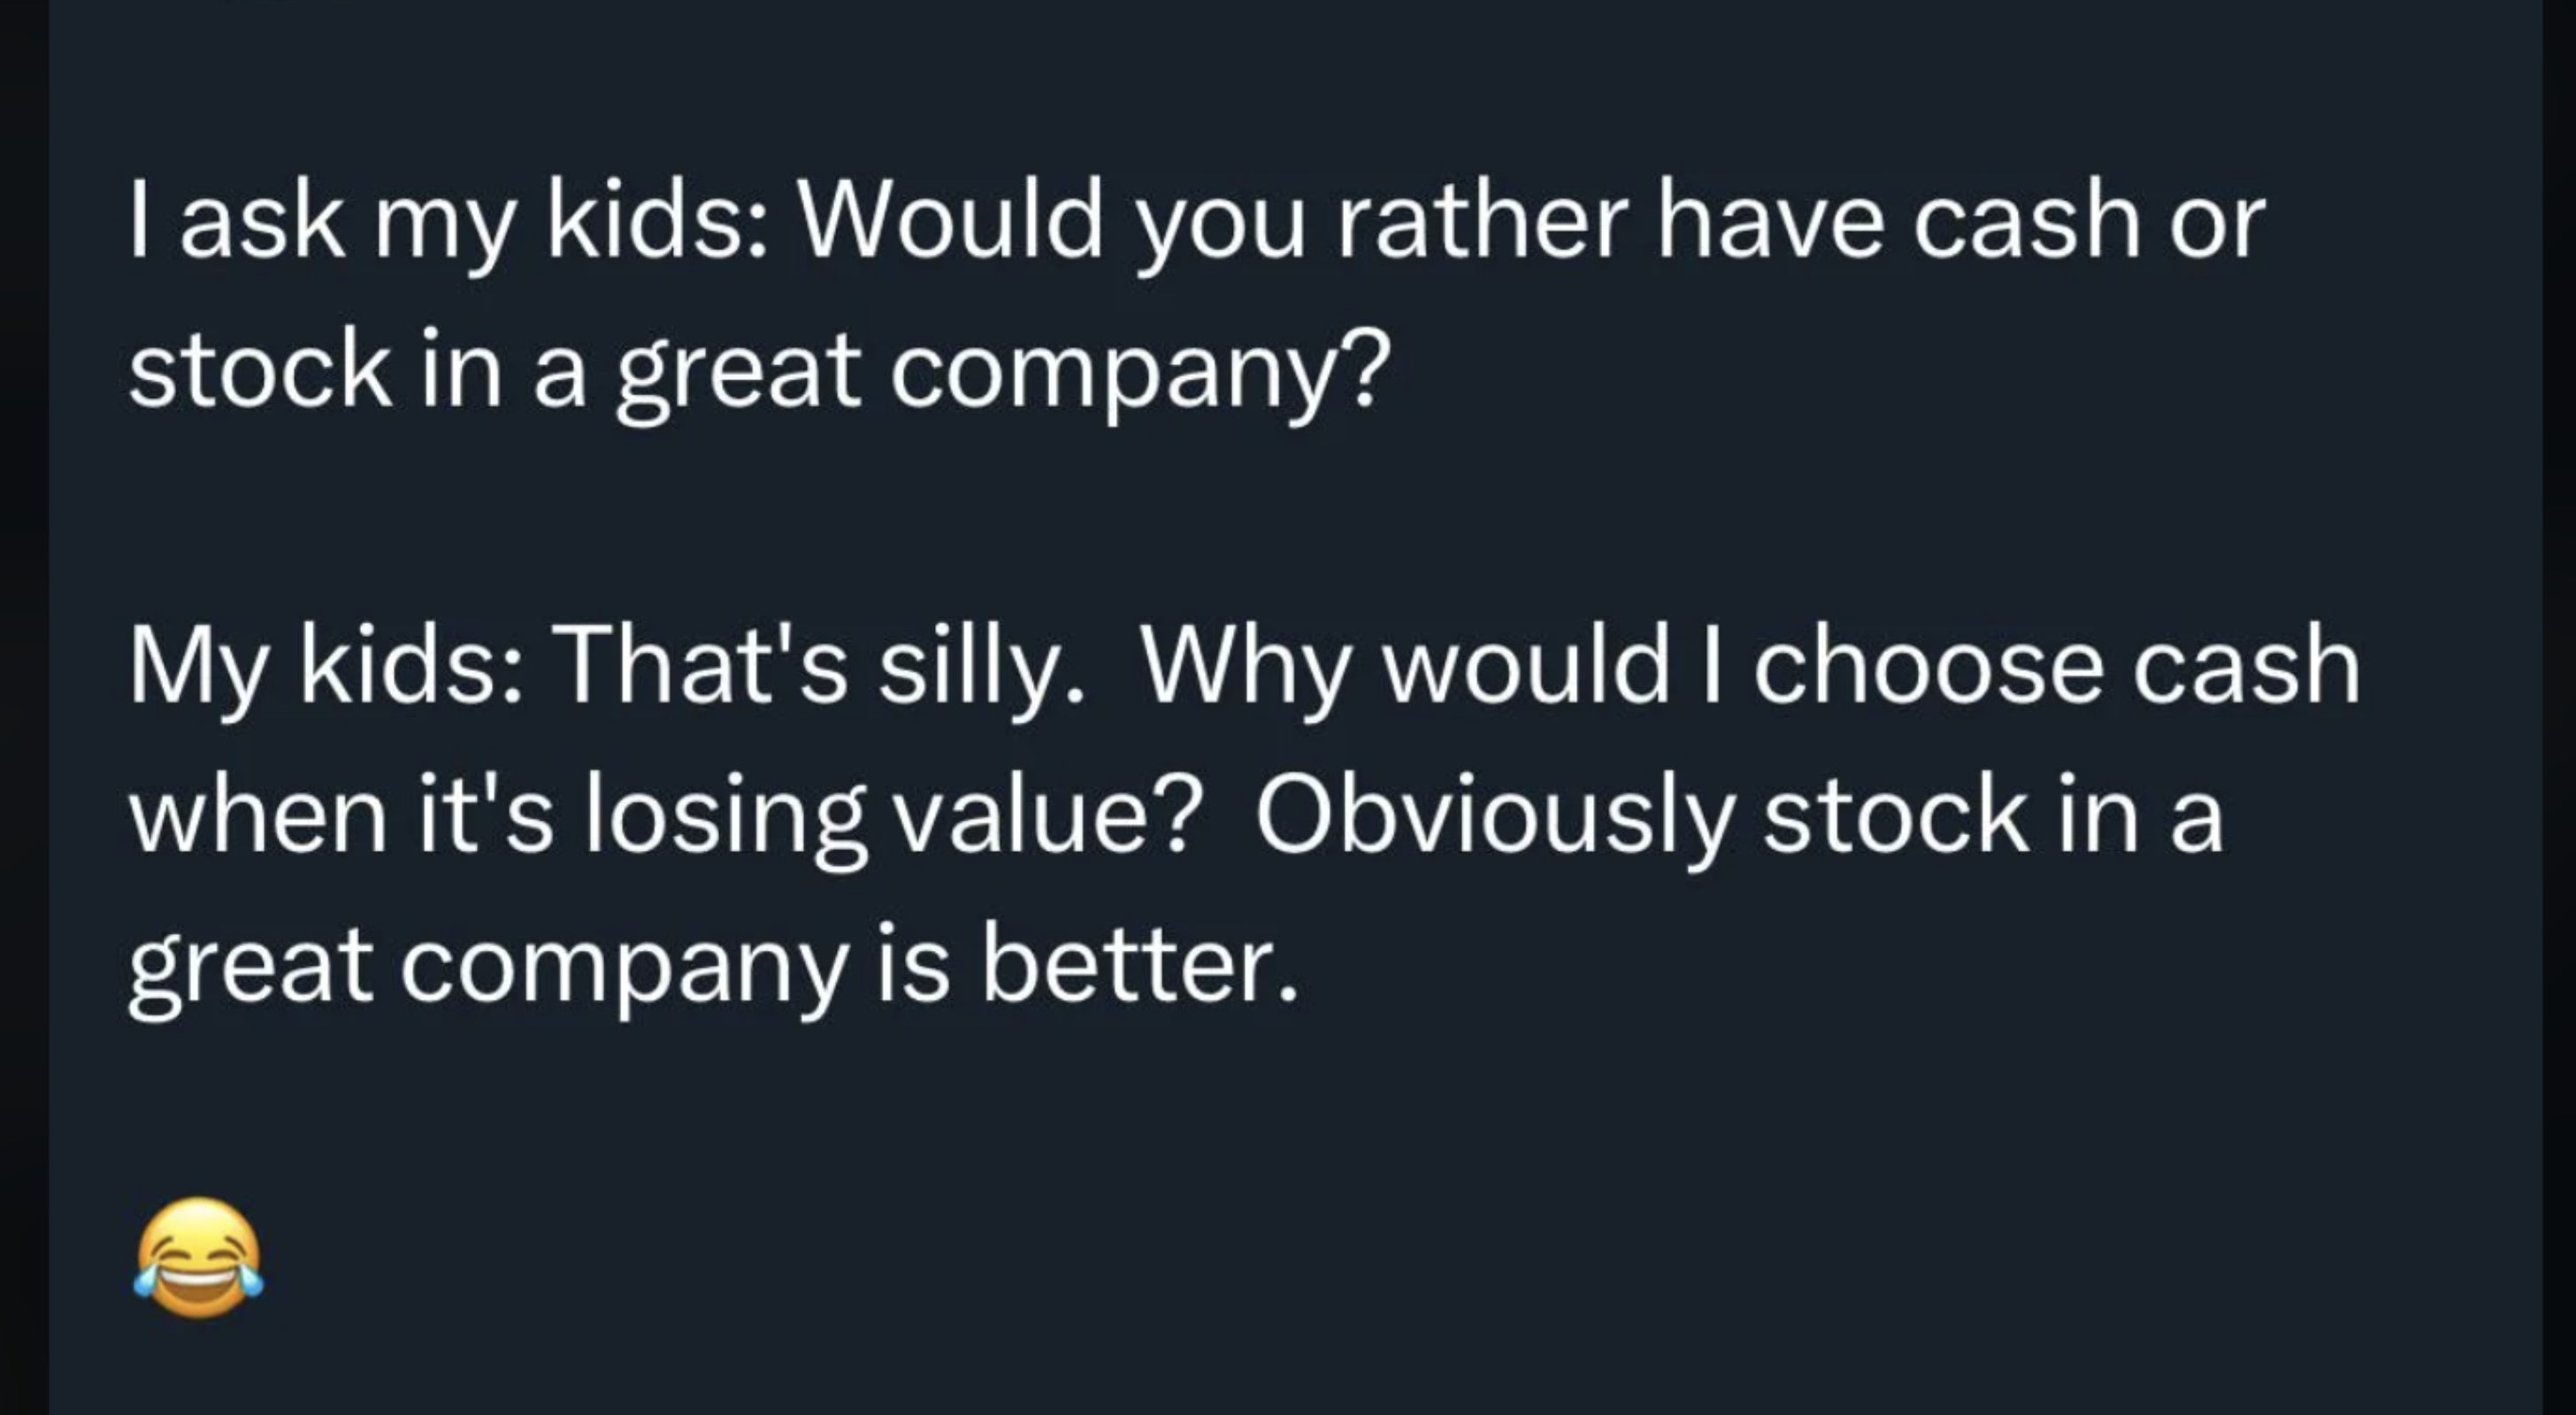 He asks kids, &quot;Would you rather have cash or stock in a great company? And they says, &quot;Why would I choose cash when it&#x27;s losing value? Obviously stock in a great company is better&quot;